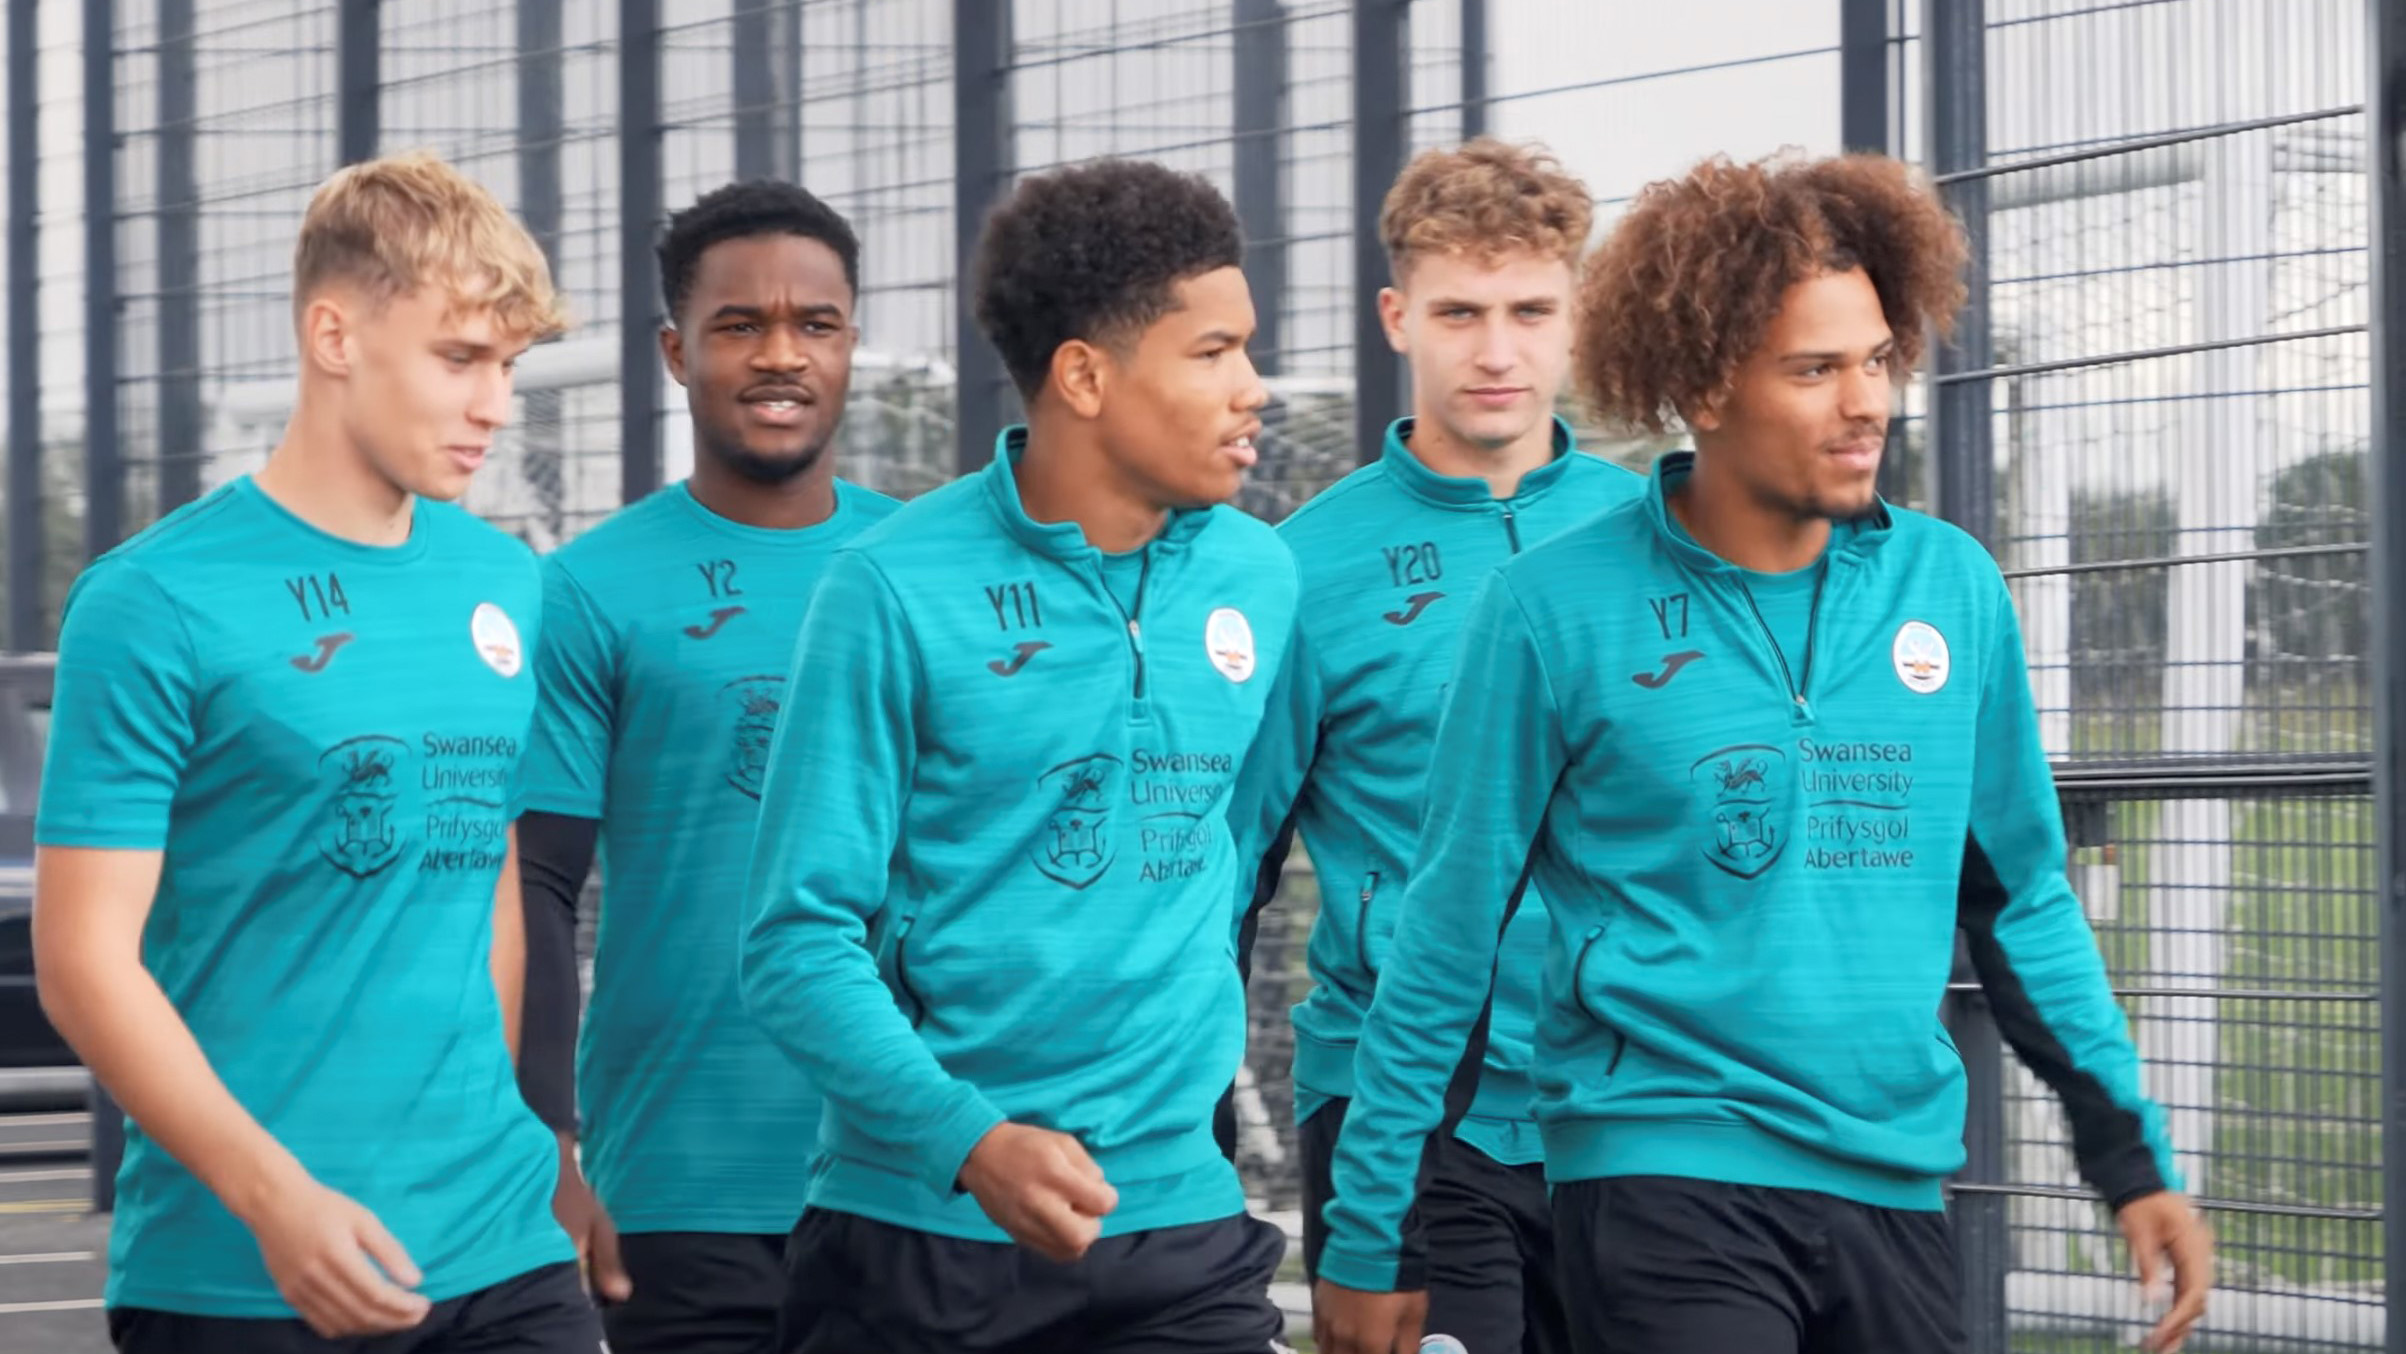 Five under-18s players arrive to train with the first team